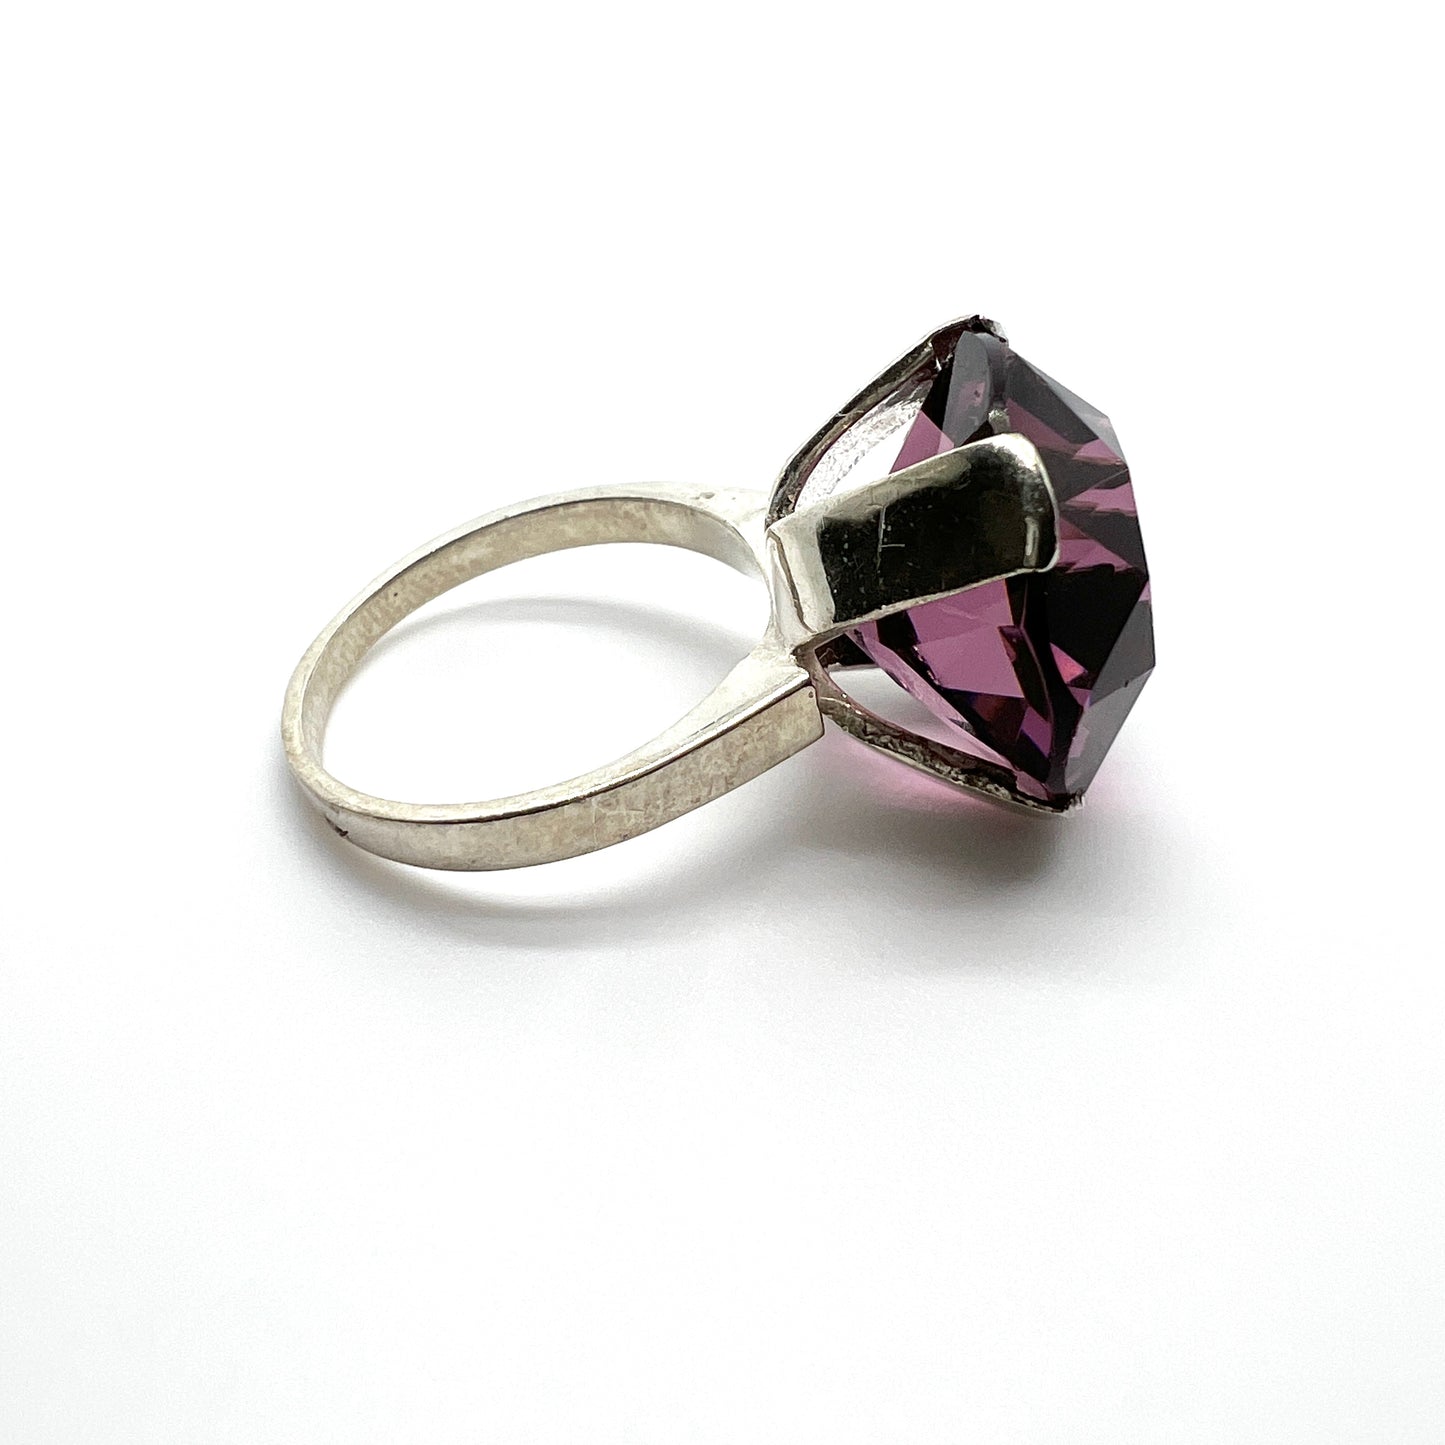 Germany c 1960-70s. Vintage 835 Silver Deep Purple Glass Ring.